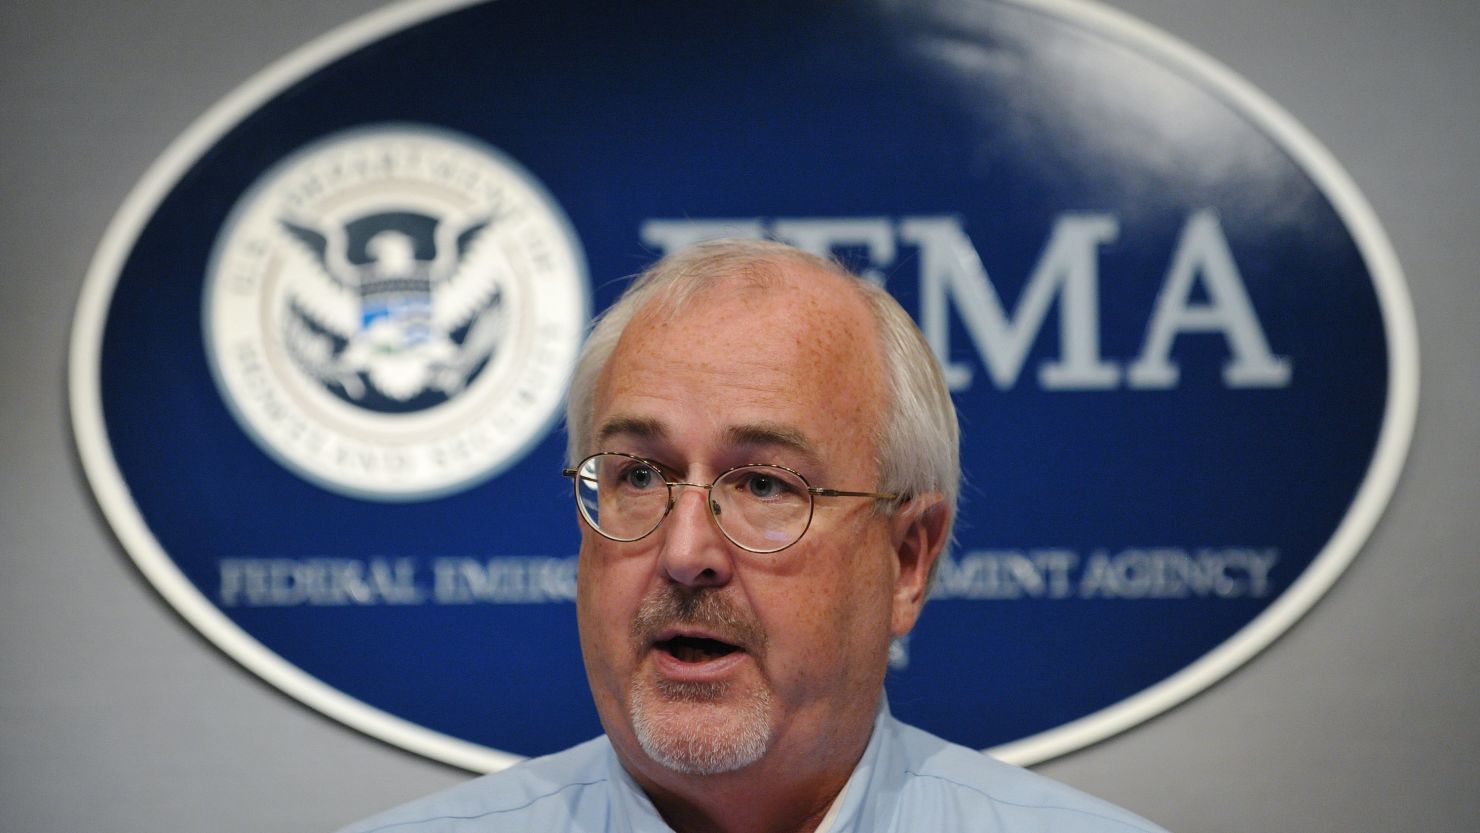 FEMA Administrator Craig Fugate says the new program could draw young people to careers in emergency management.